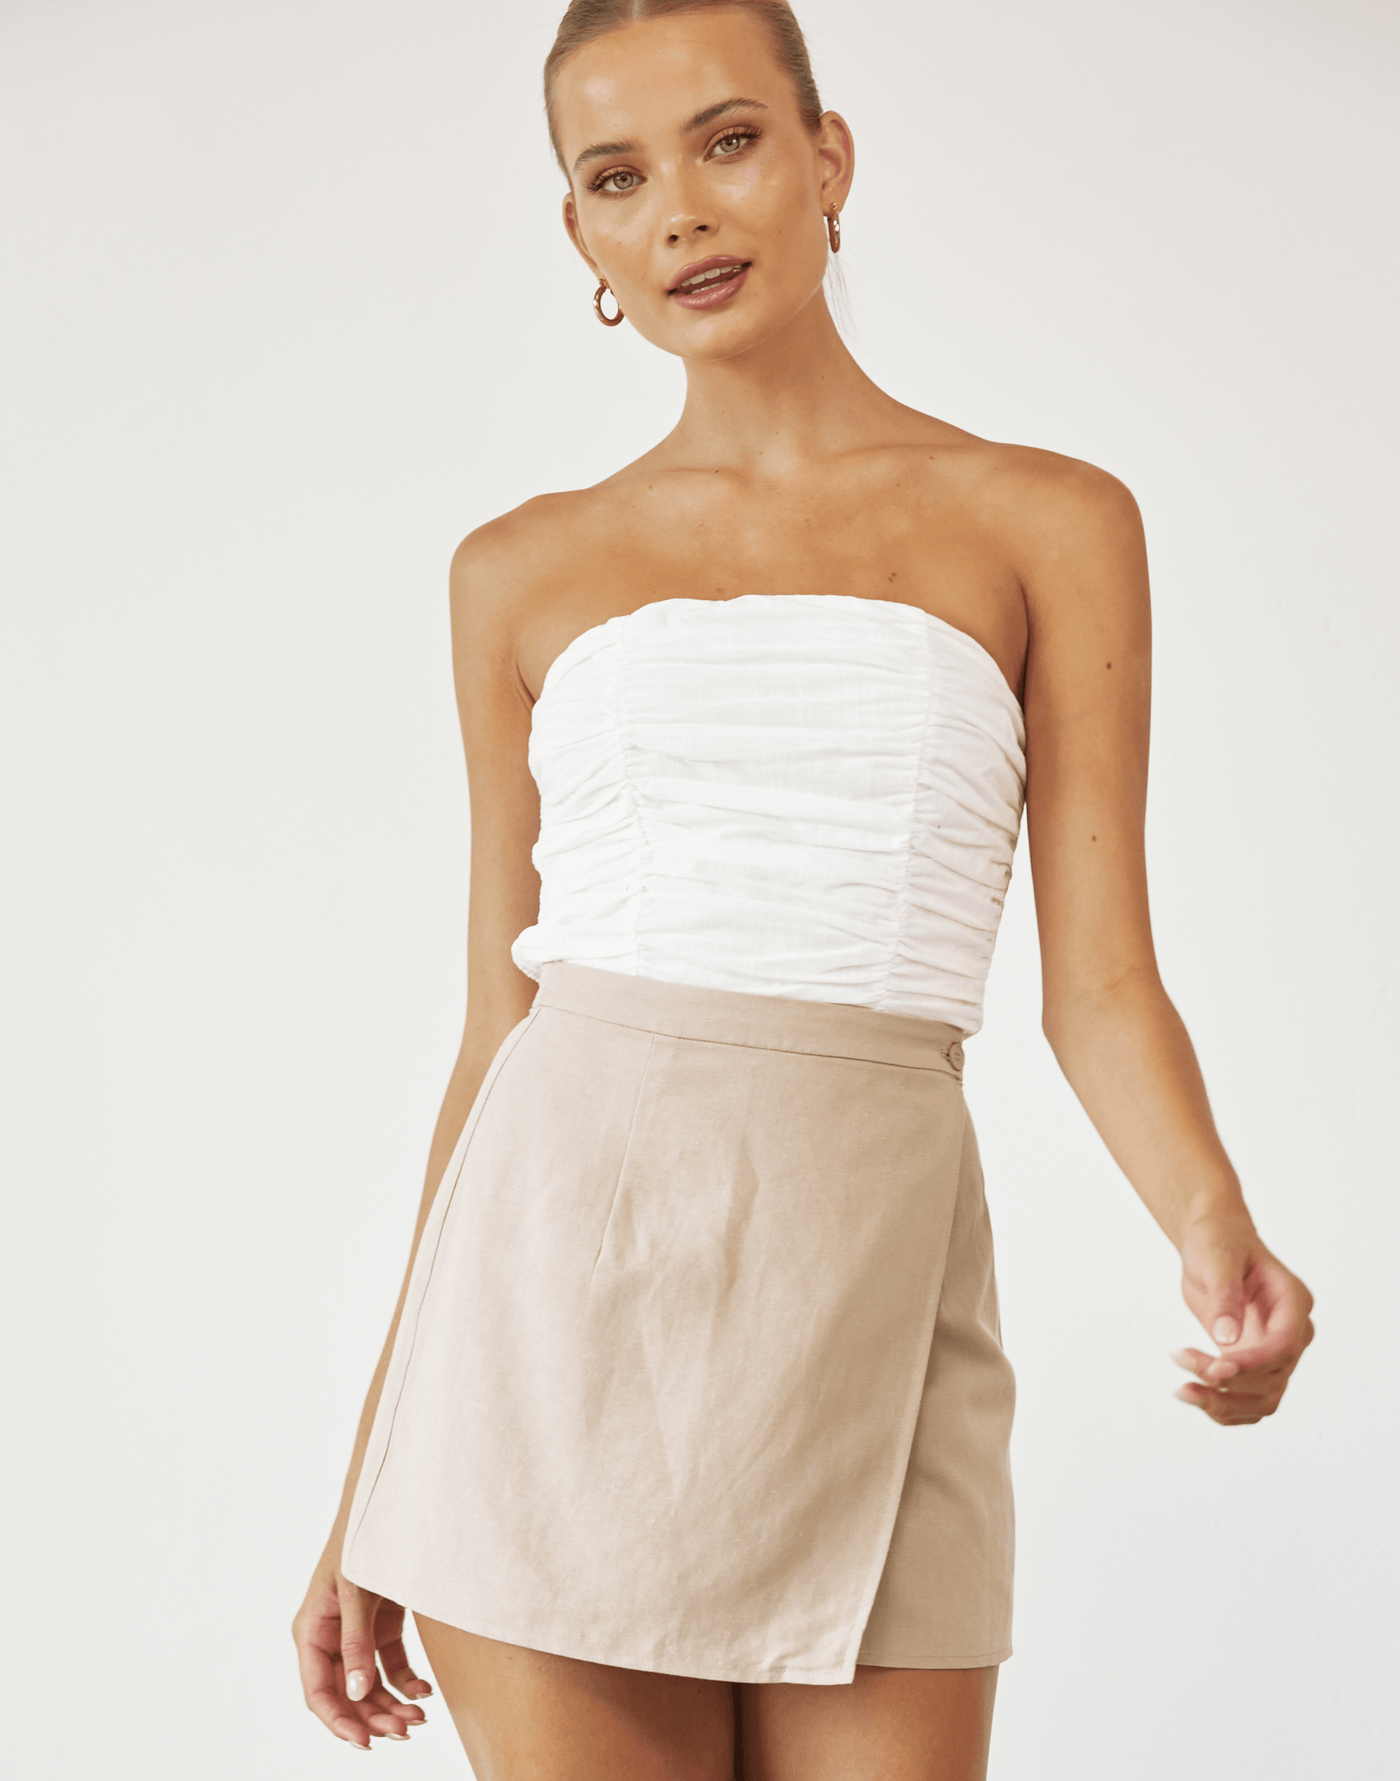 Take Me There Crop Top (White) - Strapless Ruched Crop Top - Women's Tops - Charcoal Clothing